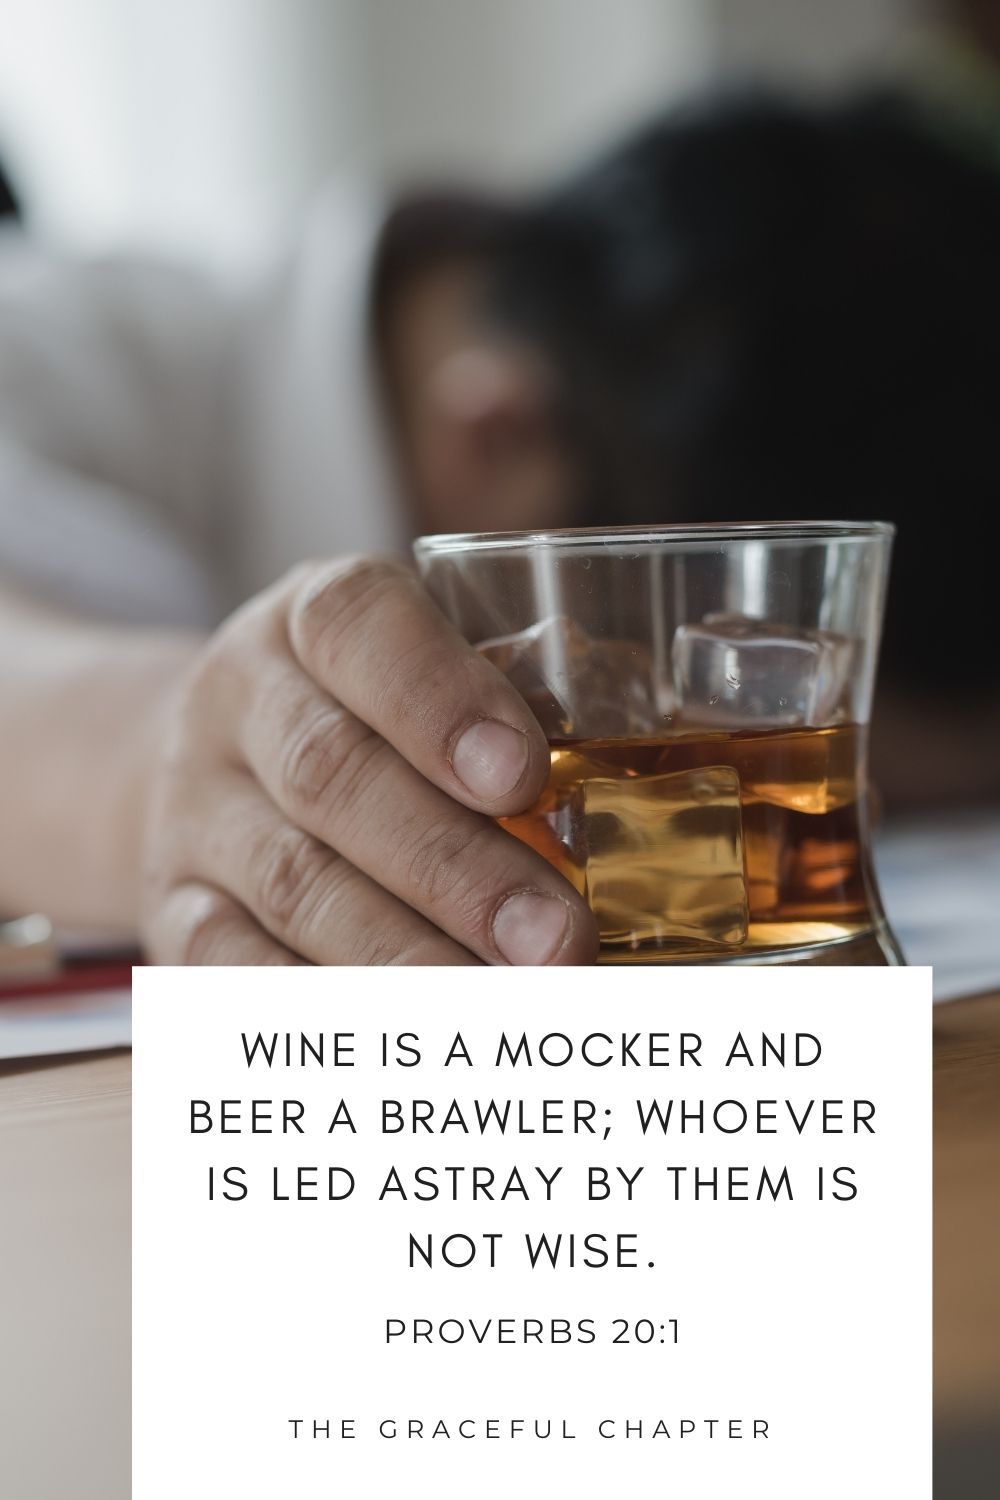 Wine is a mocker and beer a brawler; whoever is led astray by them is not wise. Proverbs 20:1